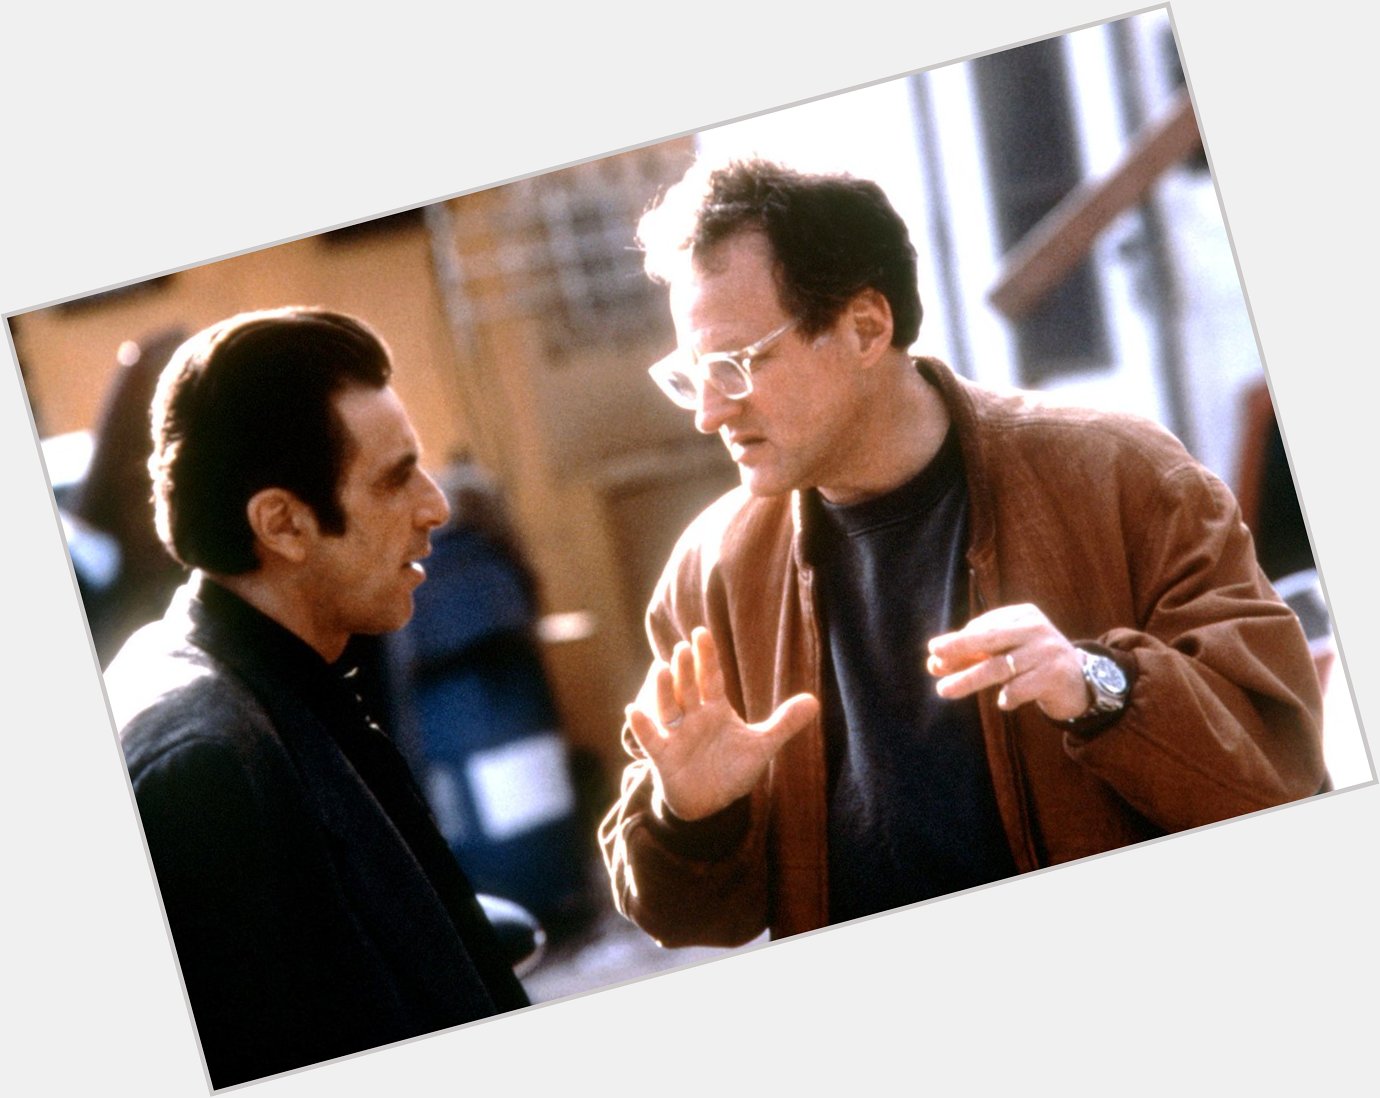 Happy 79th to birthday boy Michael Mann, seen here on the set of HEAT with Al Pacino 